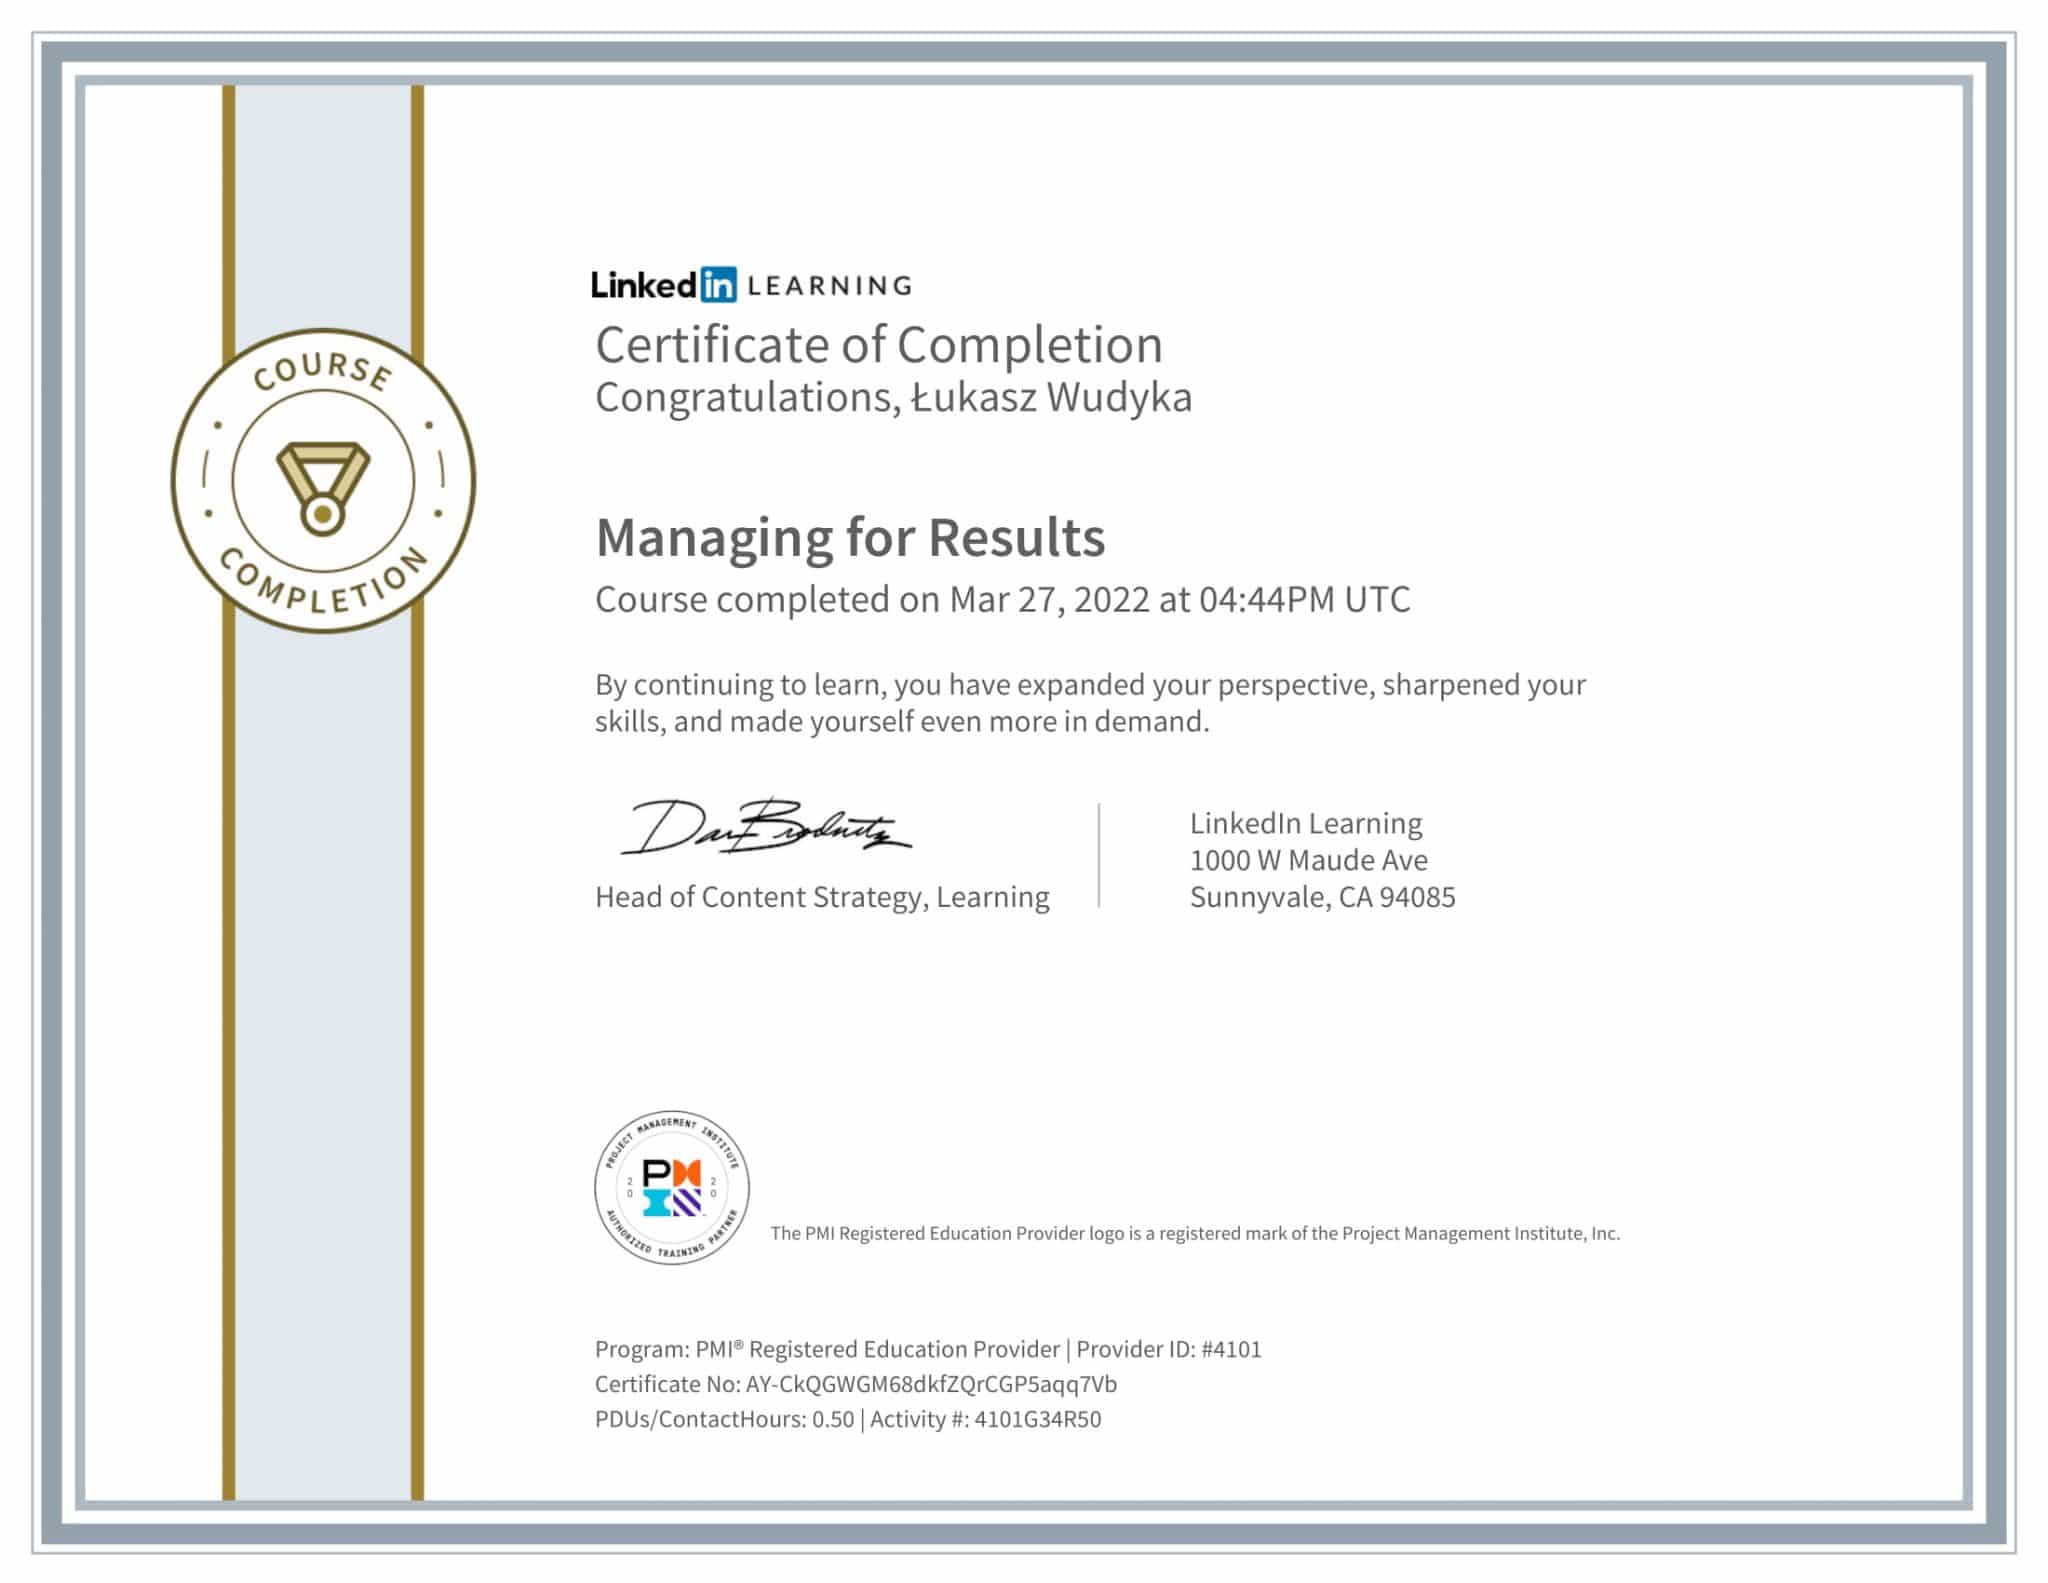 CertificateOfCompletion_Managing for Results (1)-1